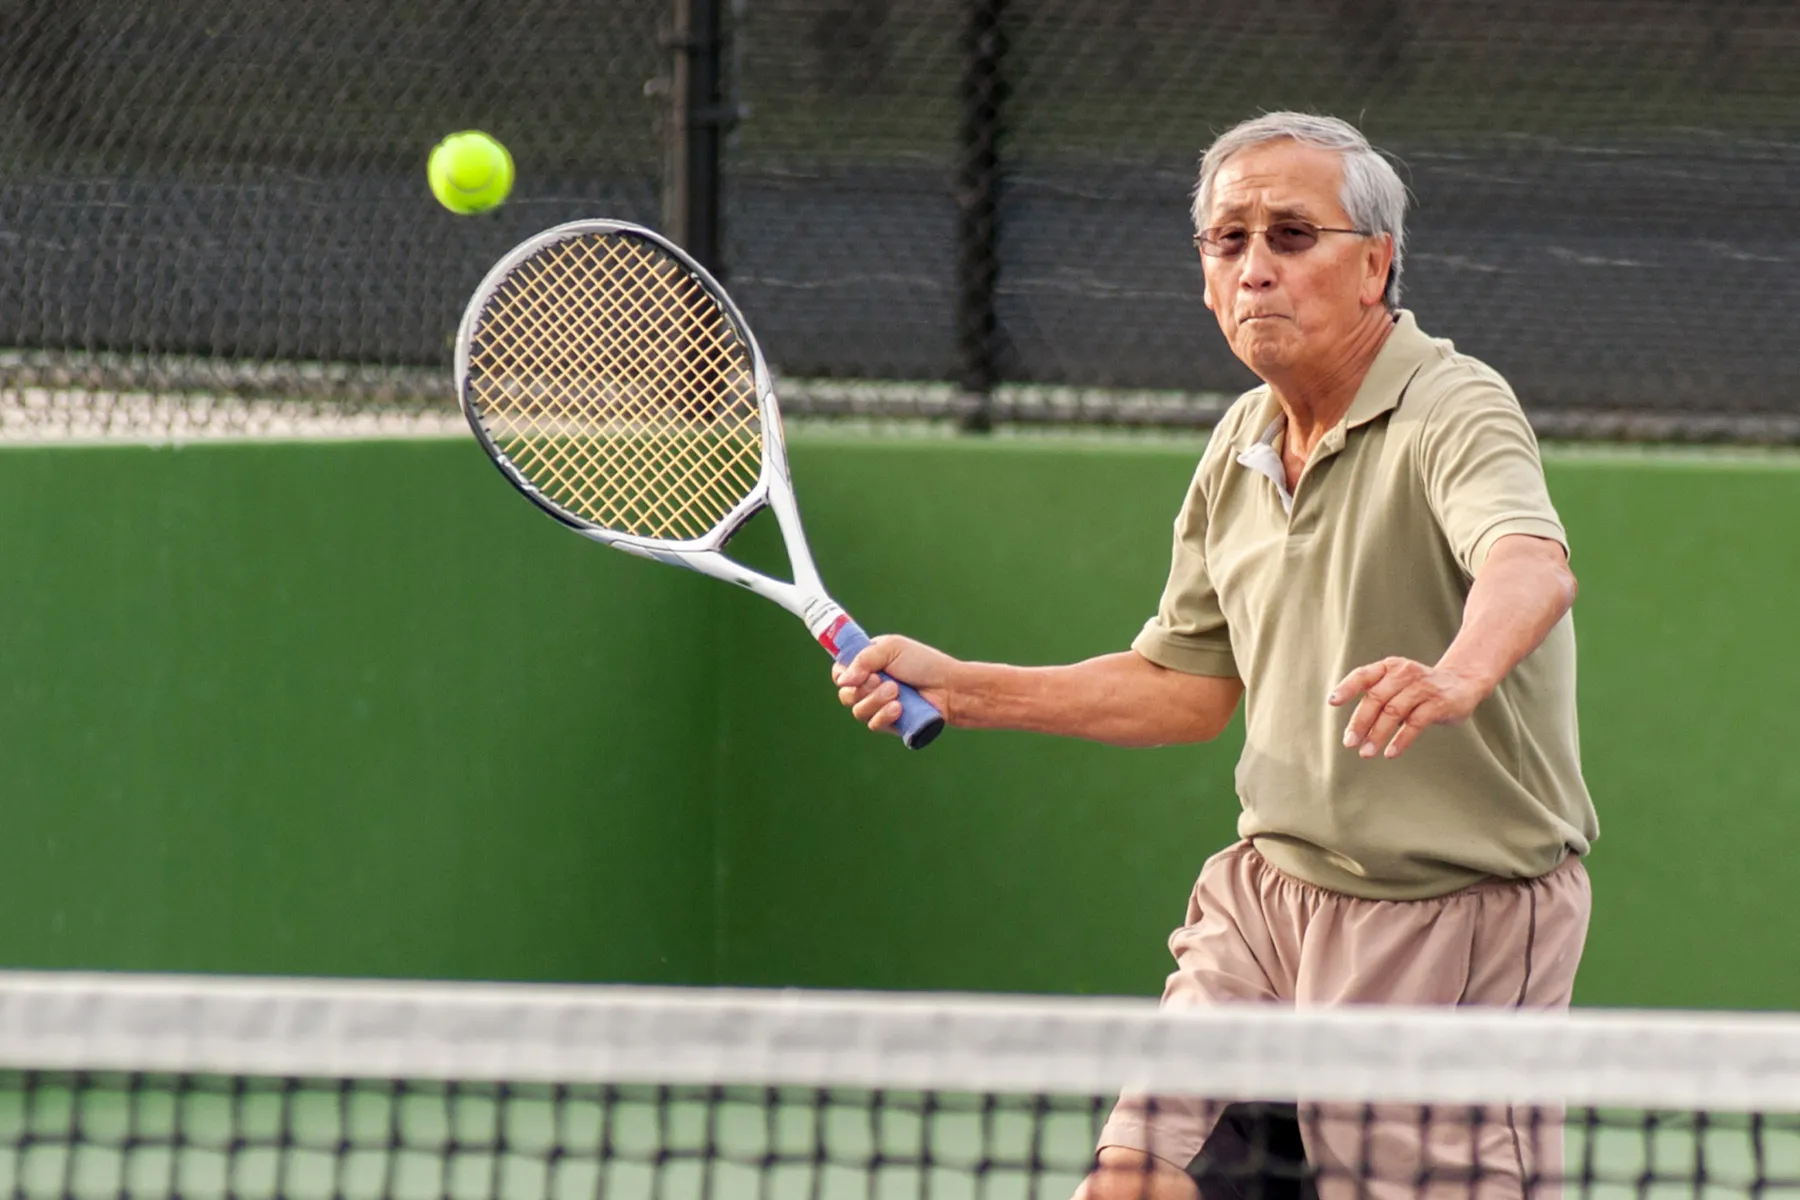 Cardiac Arrest Risk Low for Active Seniors During Sports